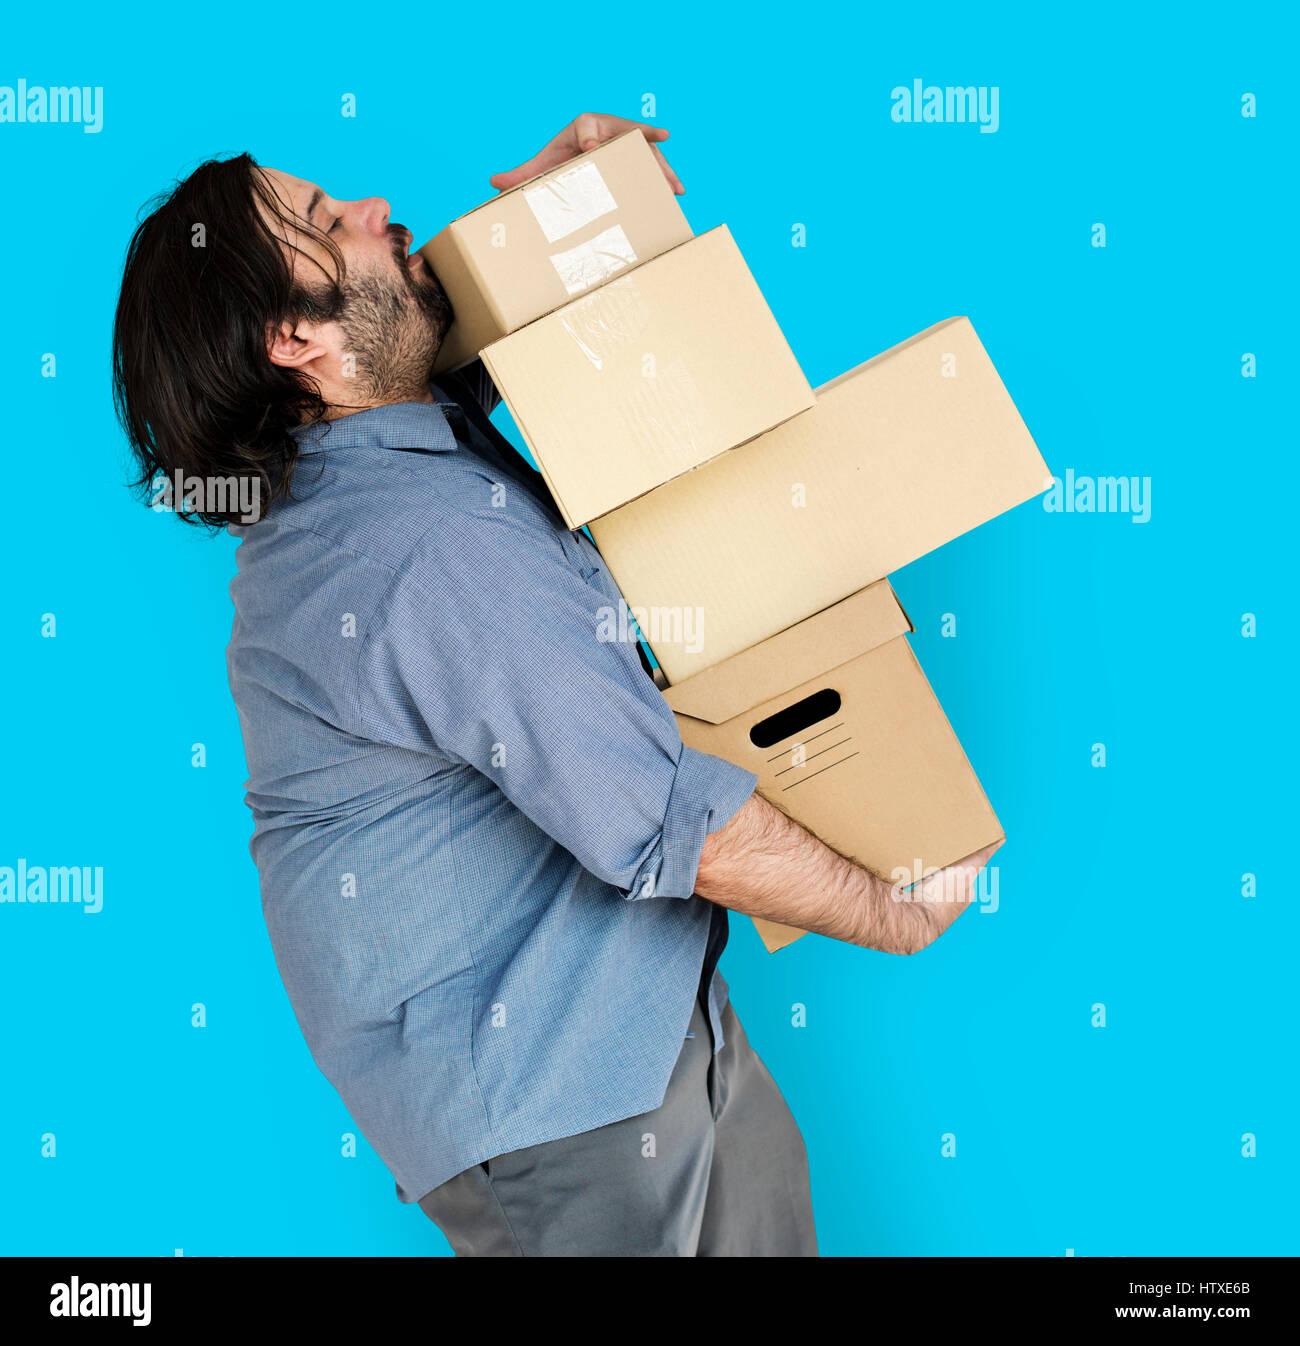 Man Carrying Box Parcel Package Overload Stock Photo